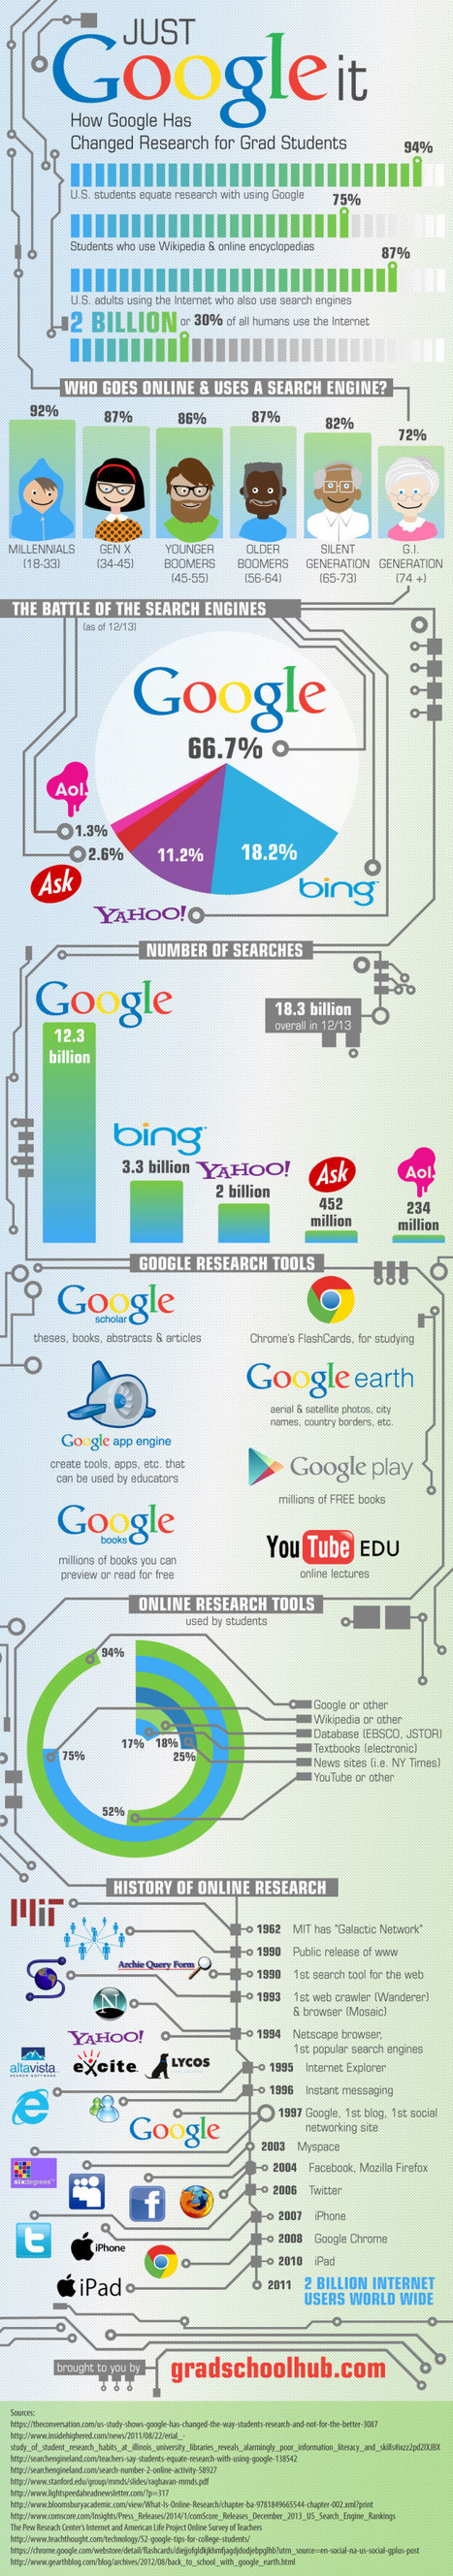 How Google Has Changed Student Research - Edudemic | Digital Learning - beyond eLearning and Blended Learning | Scoop.it